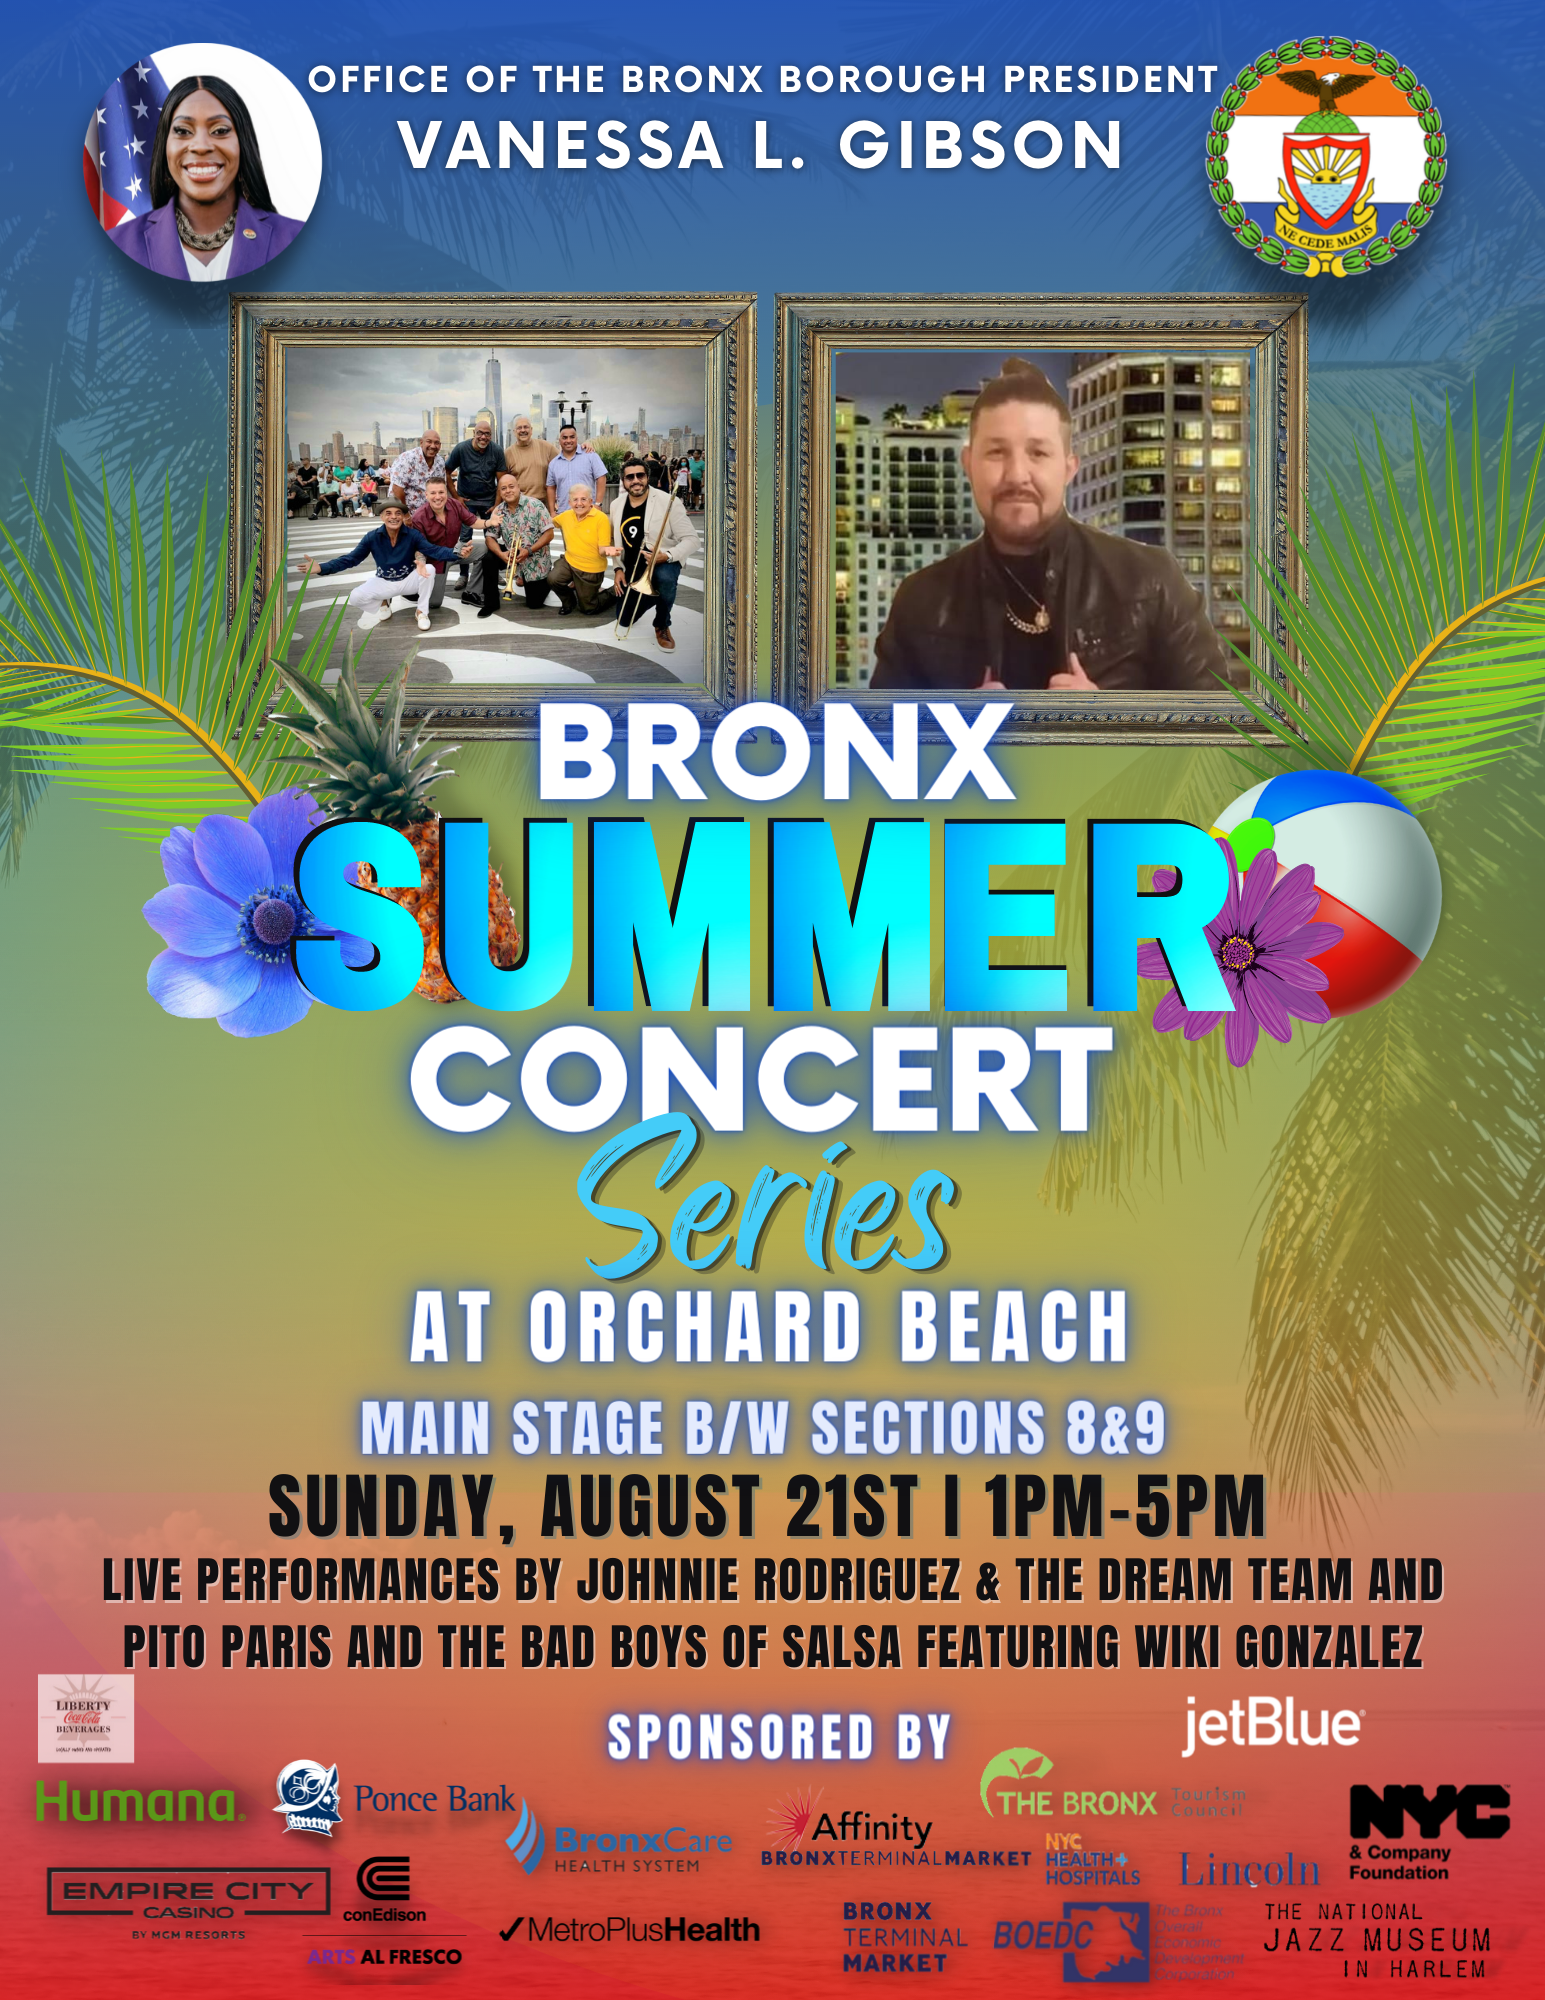 A flyer for the Bronx Summer Concert series at Orchard Beach on August 21 from 1 PM to 5 PM